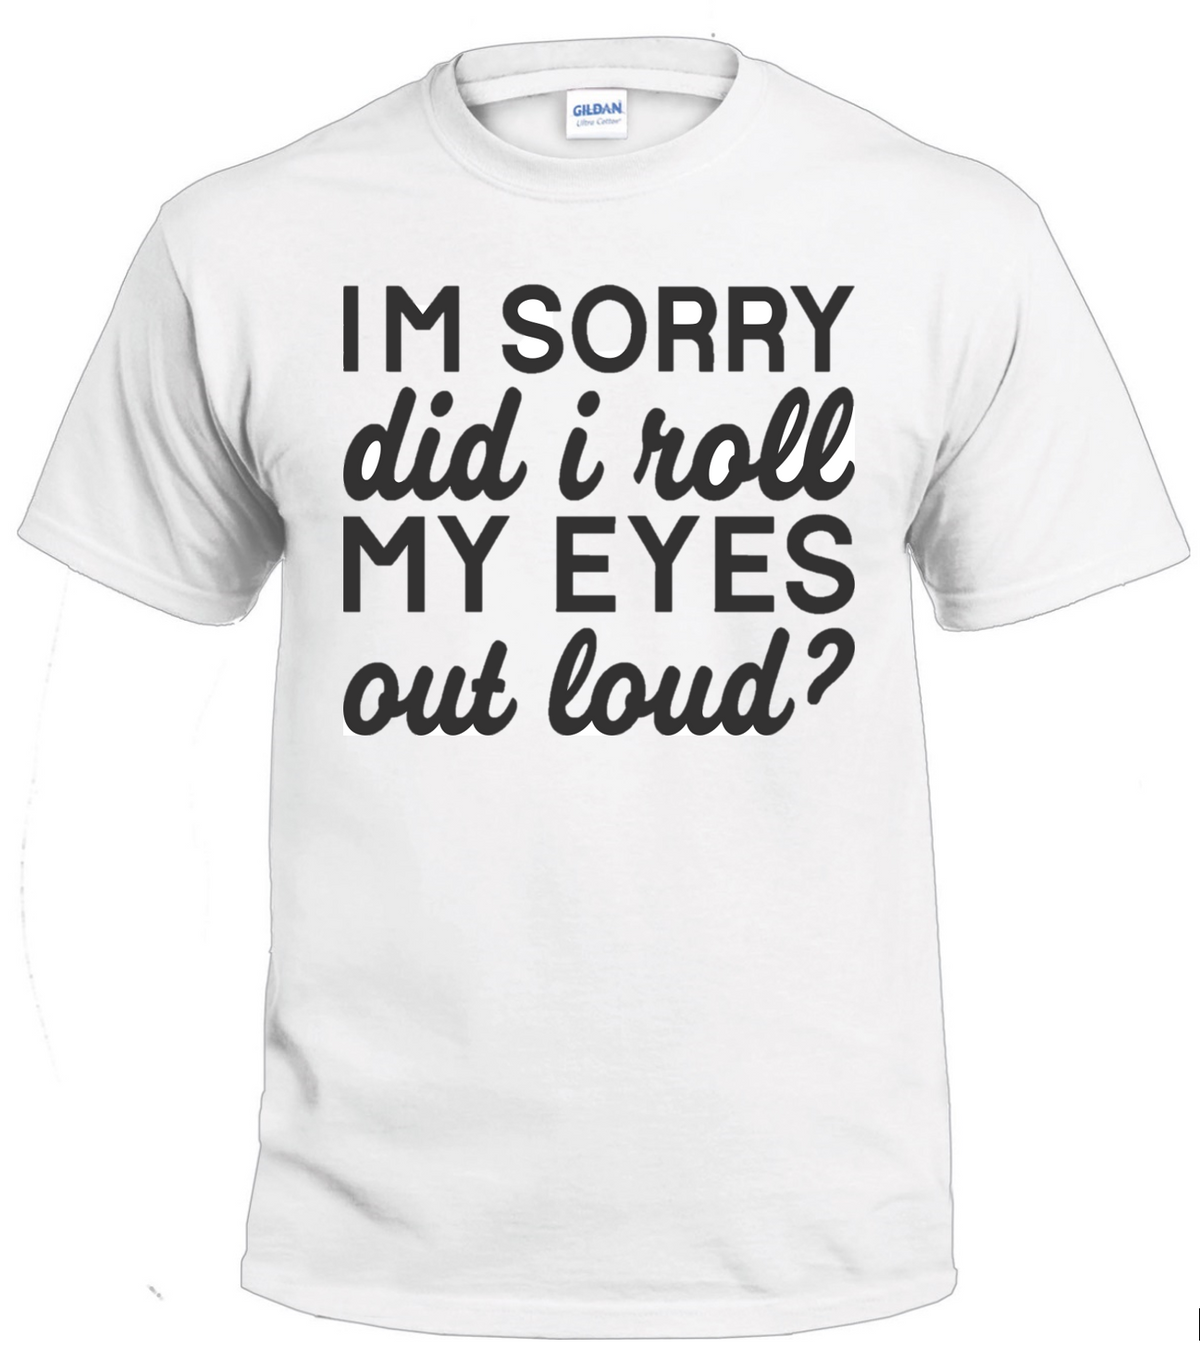 I'm Sorry Did I Roll My Eyes Out Loud? Sassy t-shirt